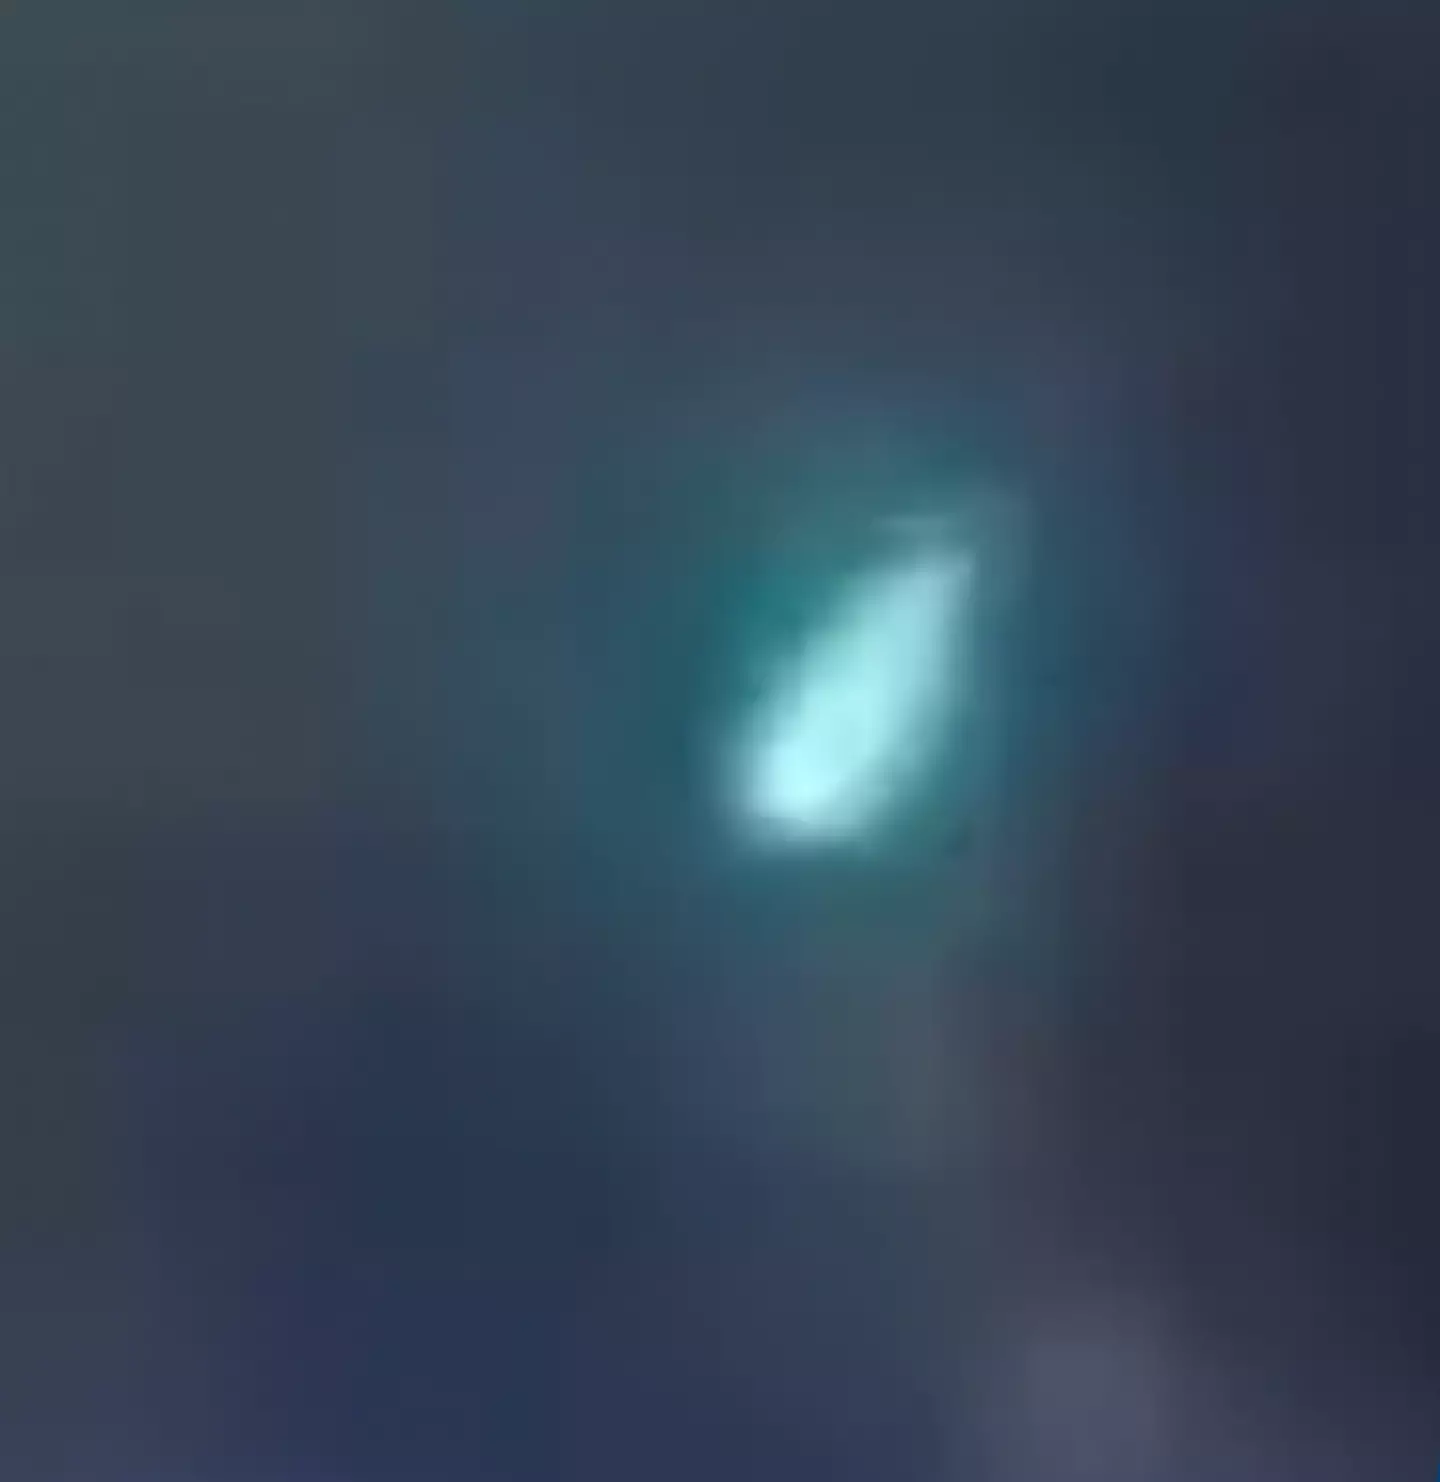 A 'UFO sighting' occurred in Las Vegas recently.